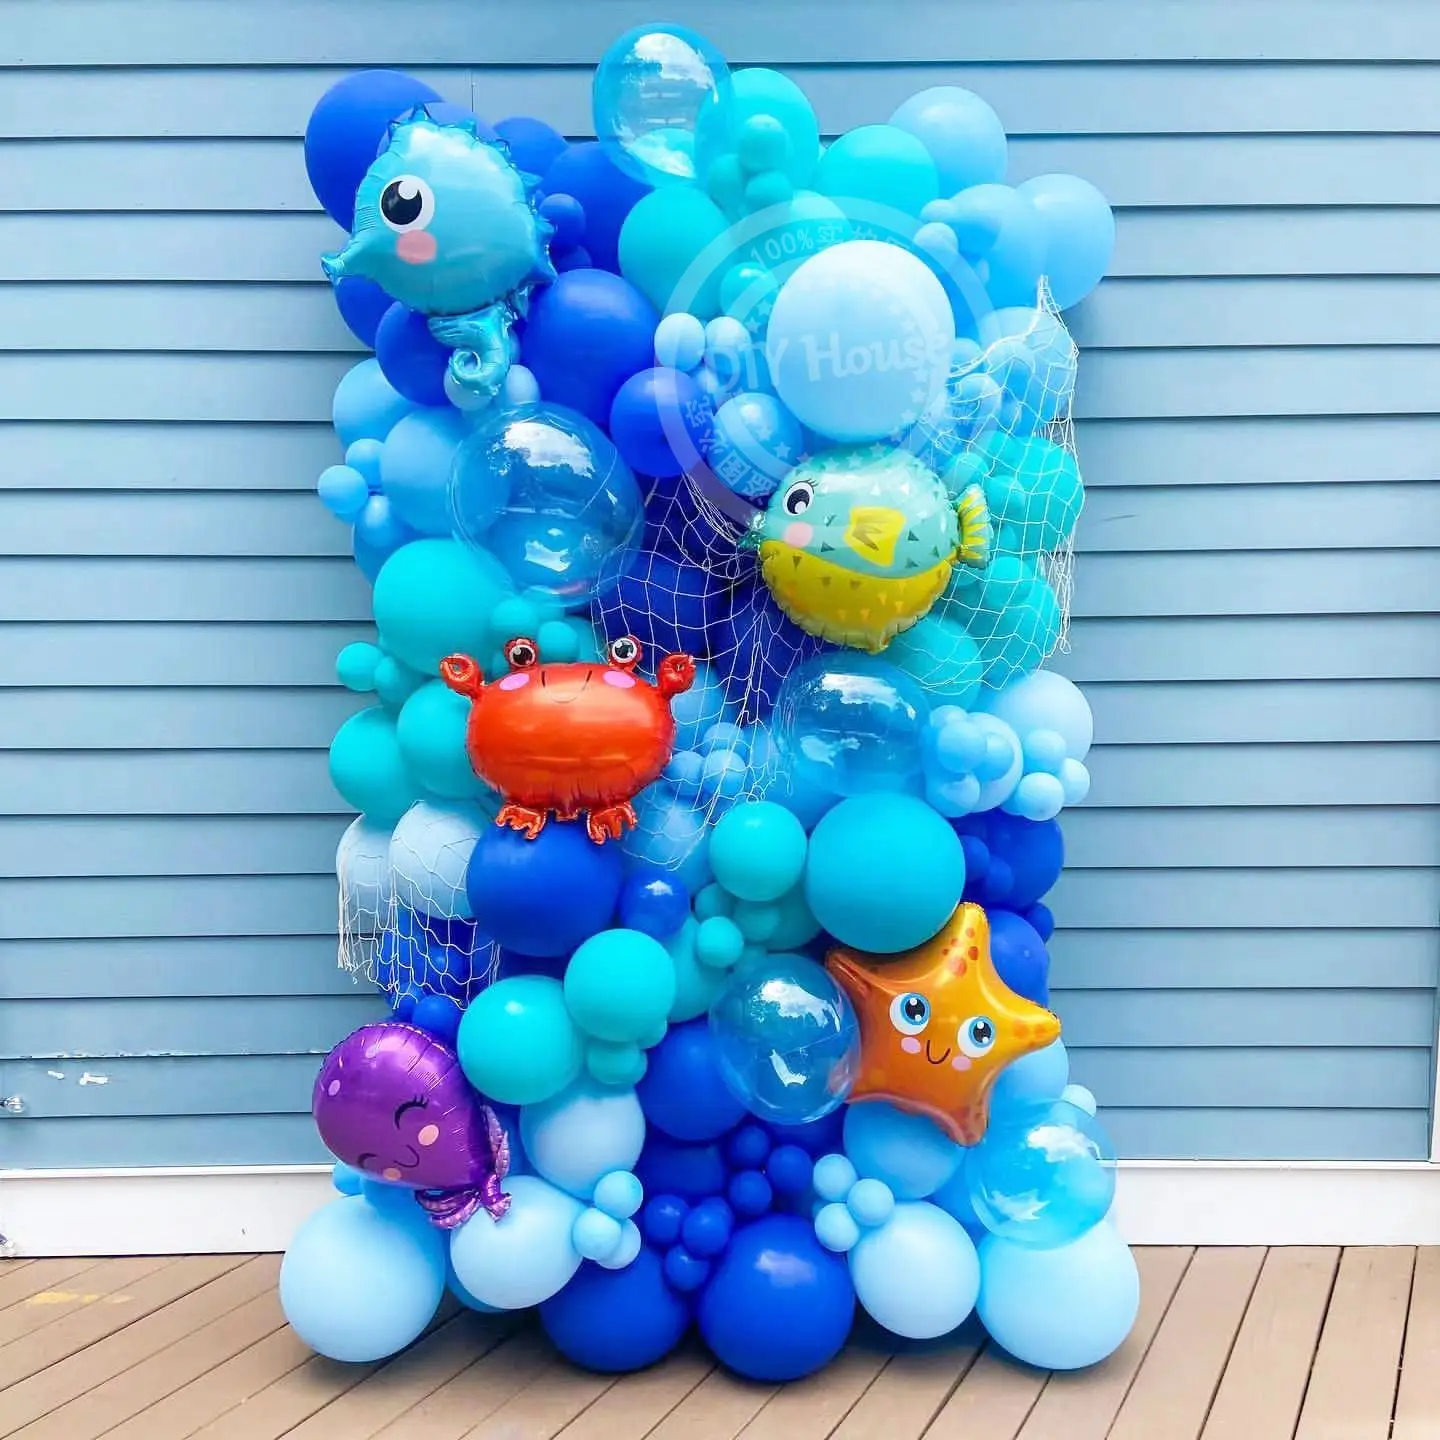 1pc Under The Sea Themed Animal Party Balloon Crab/Starfish/Octopus Balloons for Kids Happy Birthday Decoration DIY Gifts Supply